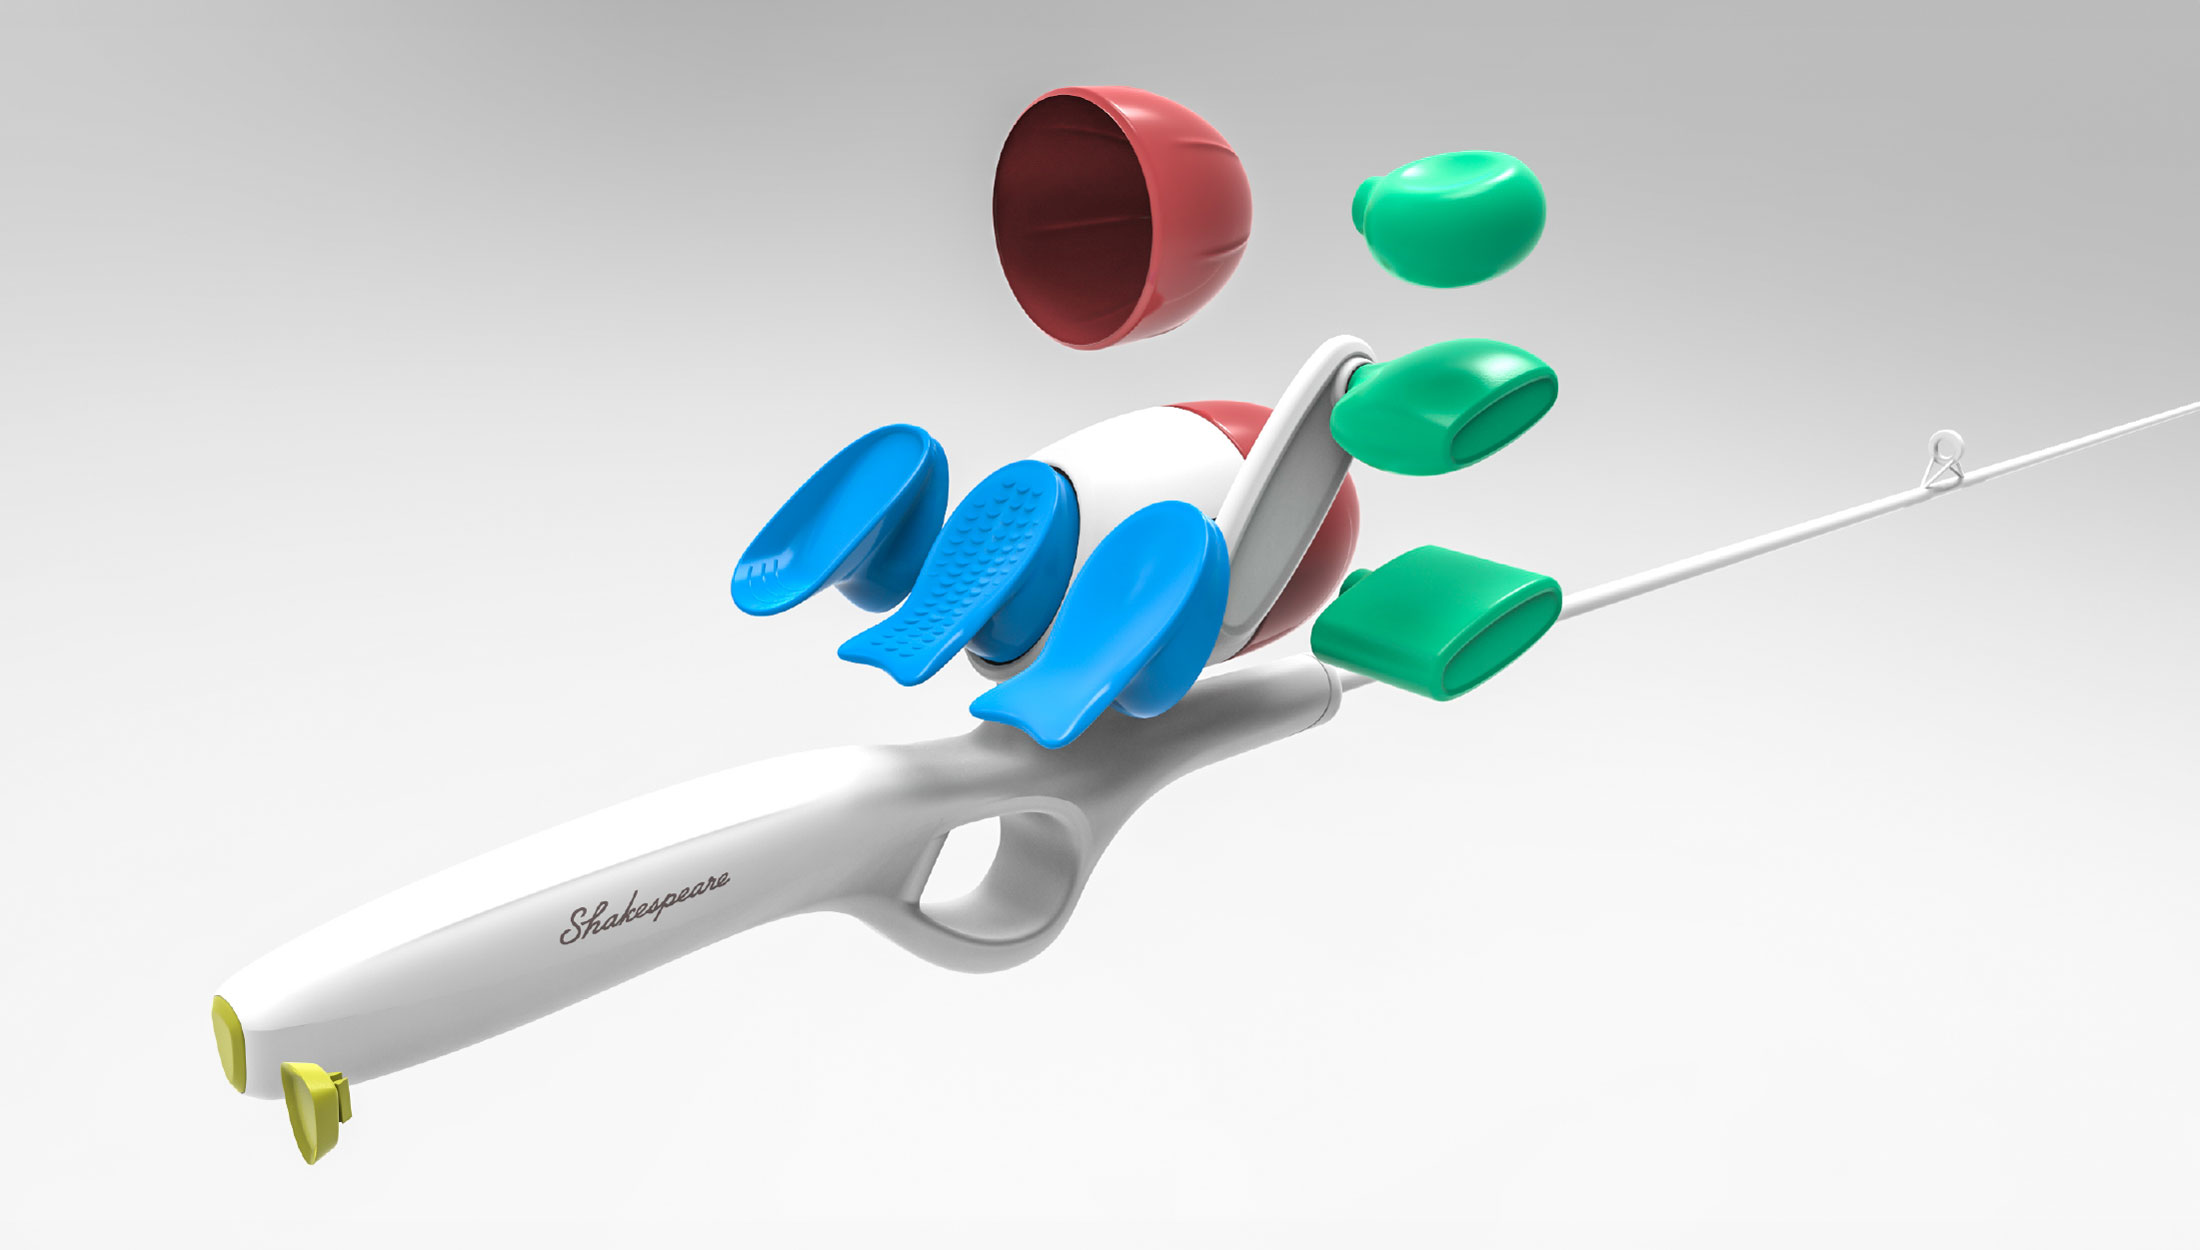 rendering of children's fishing rod showing grip and handle options